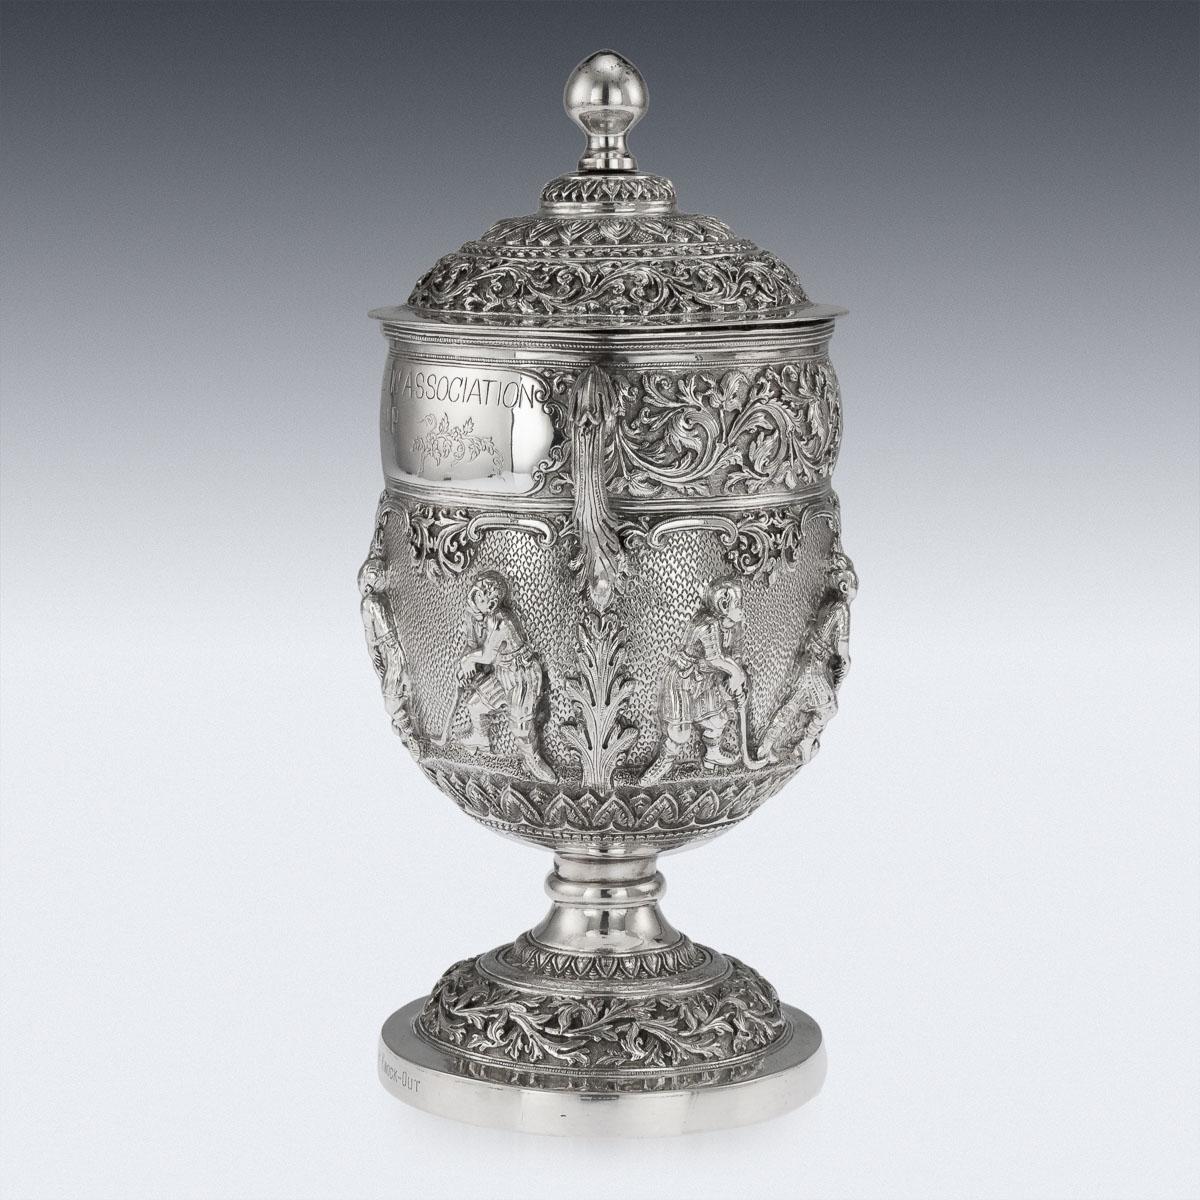 Antique early 20th Century Burmese (Myanmar) solid silver hockey trophy, of traditional shape, highly-decorative, the body embossed with hockey players Burmese vs Europeans, below a chased border of foliate scroll decoration, applied with leaf